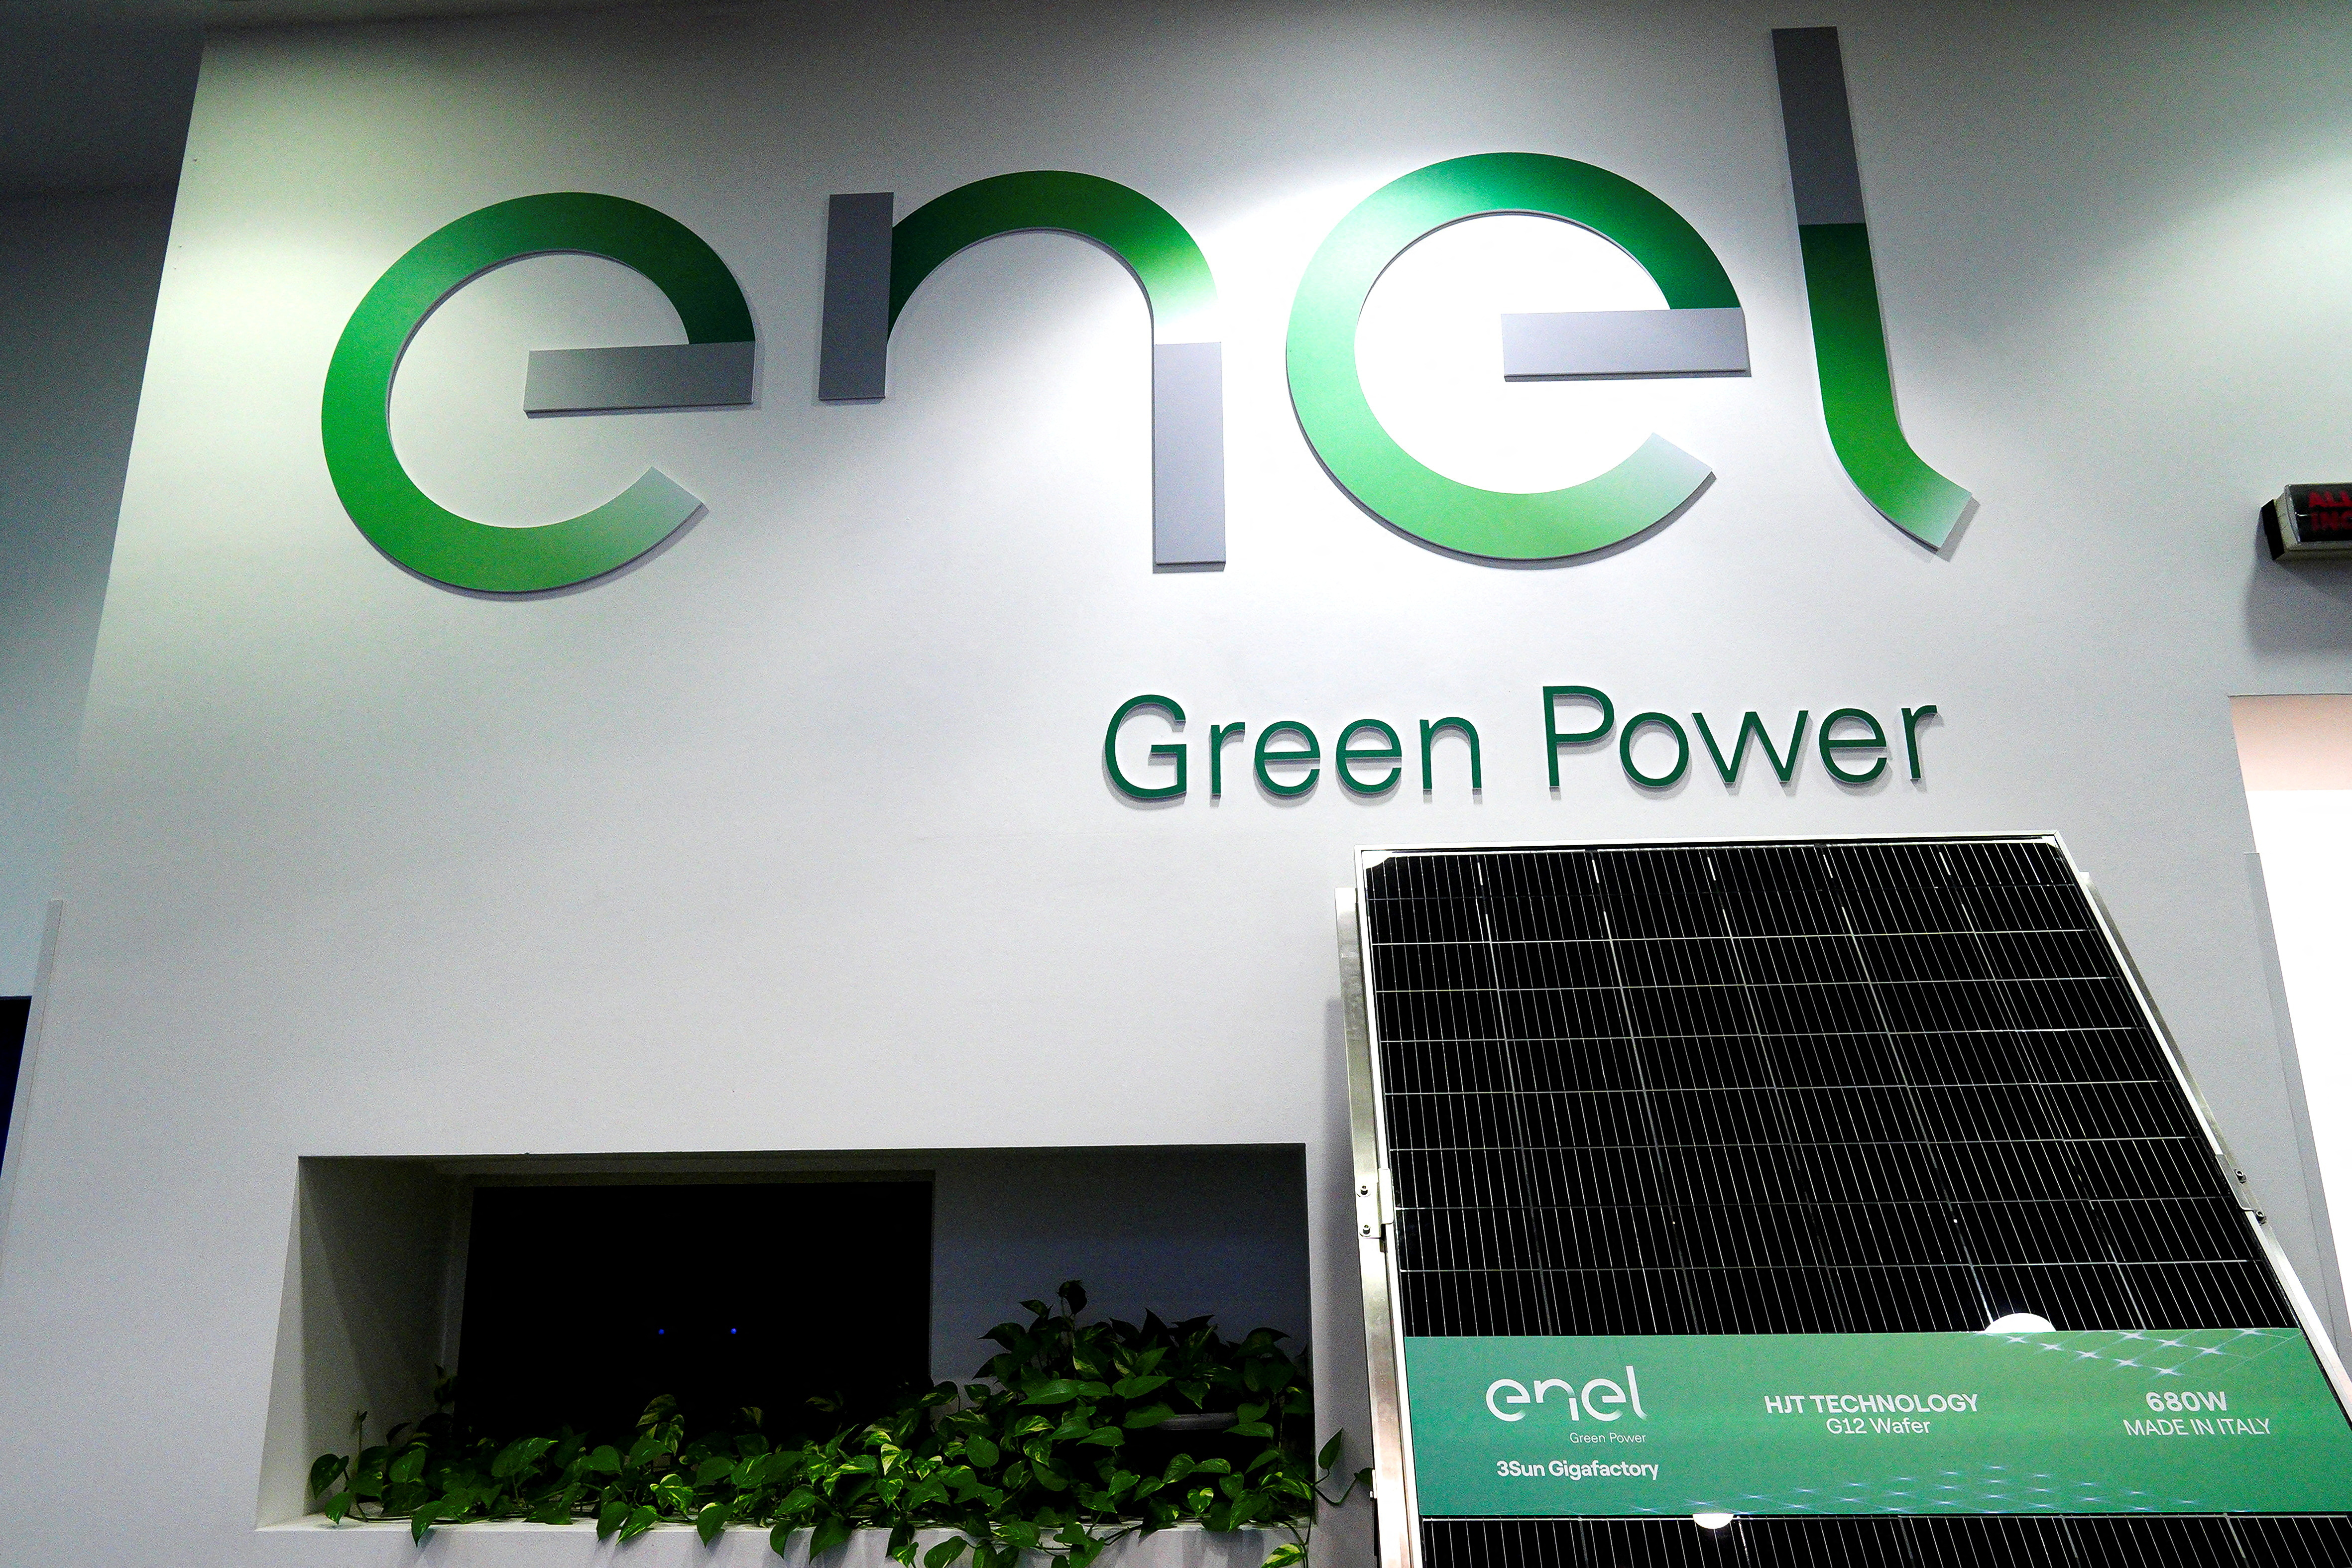 Under new CEO, Enel seen more focused on Italy, selective on renewables